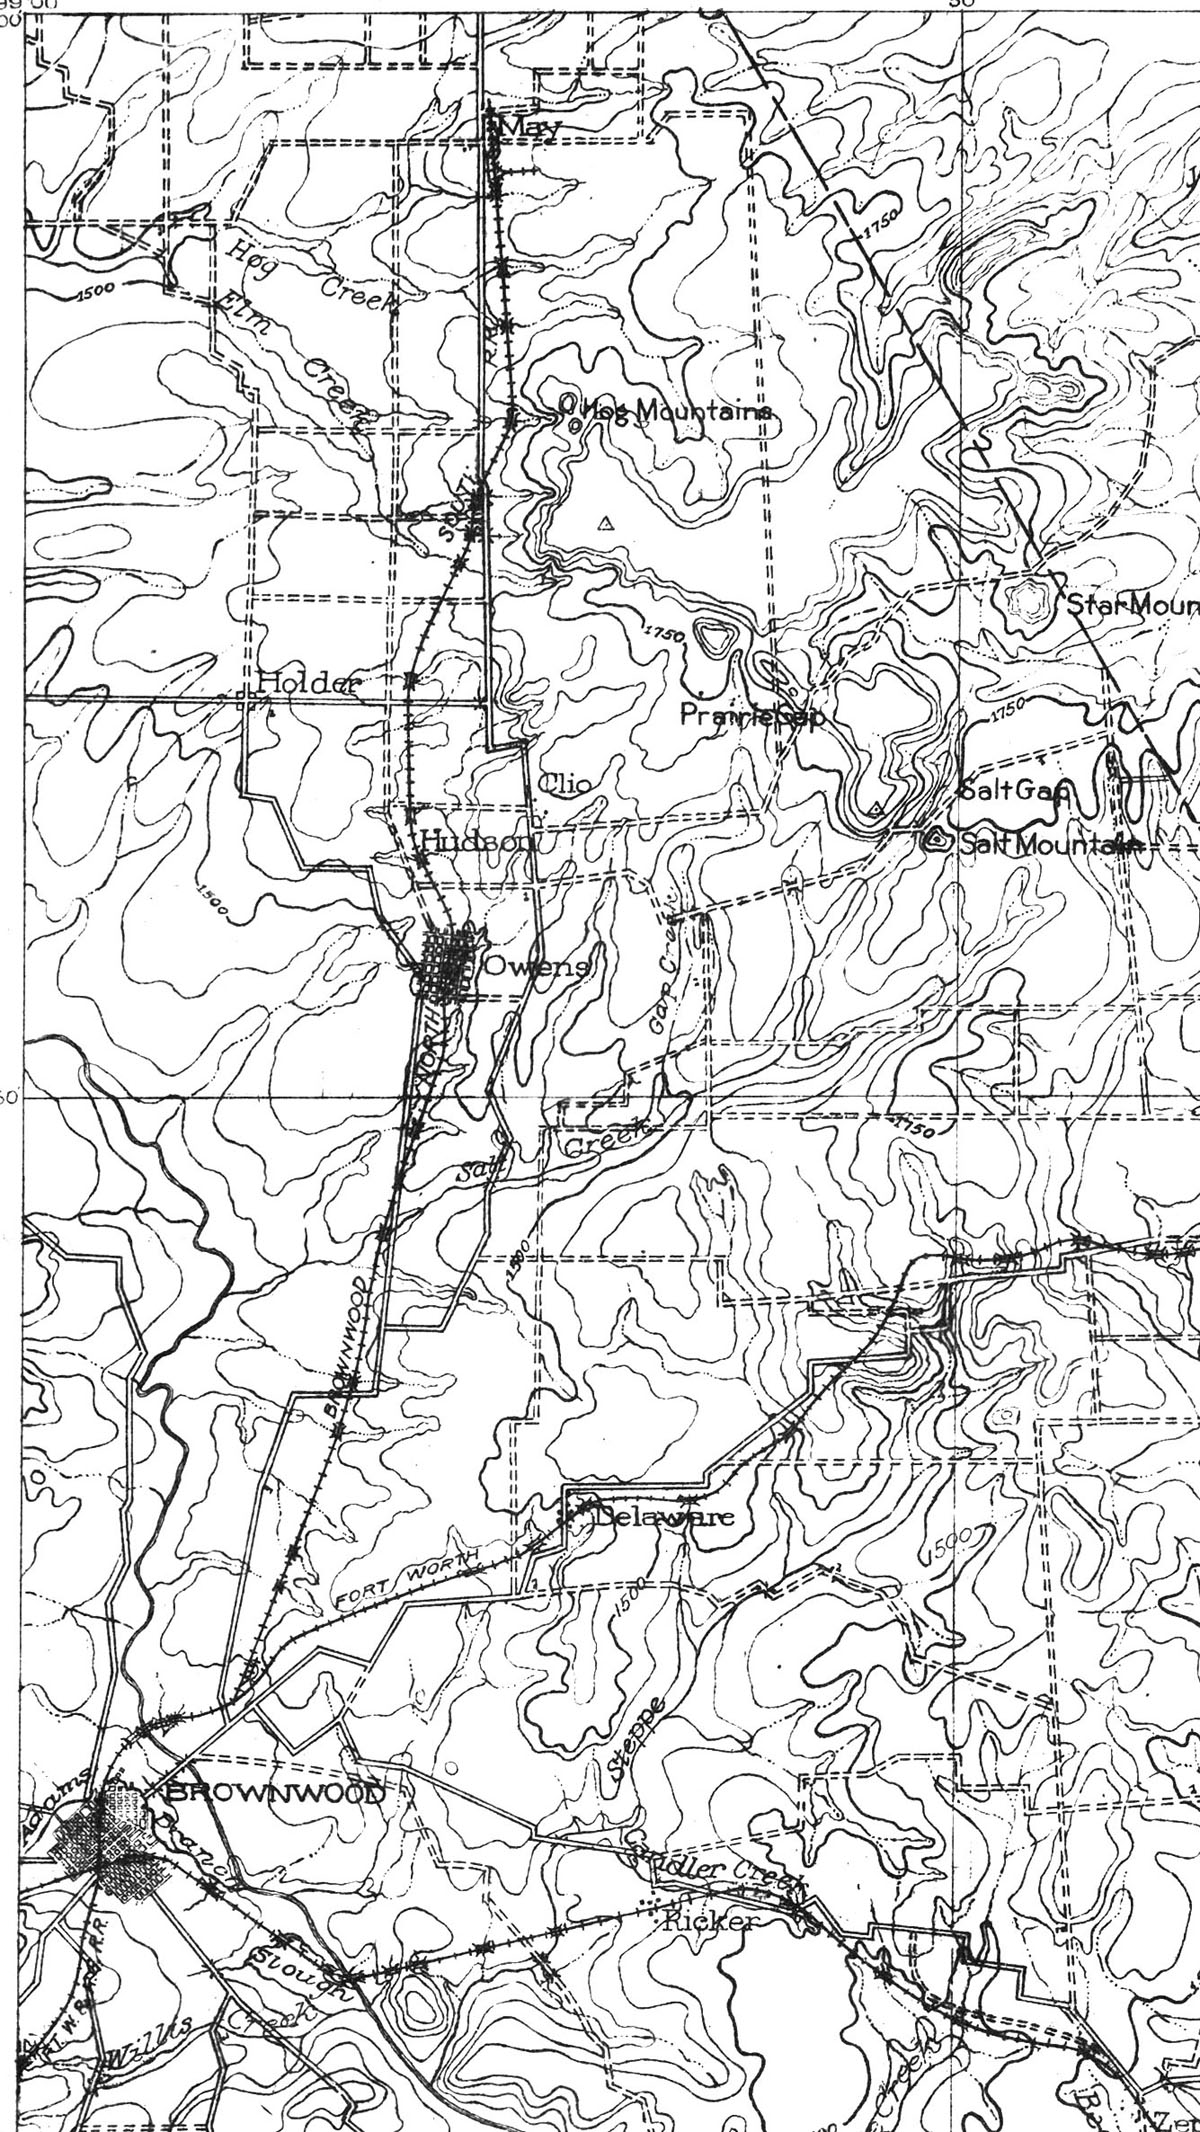 Brownwood North & South Texas Railway Company (Tex.), map showing route in 1918.